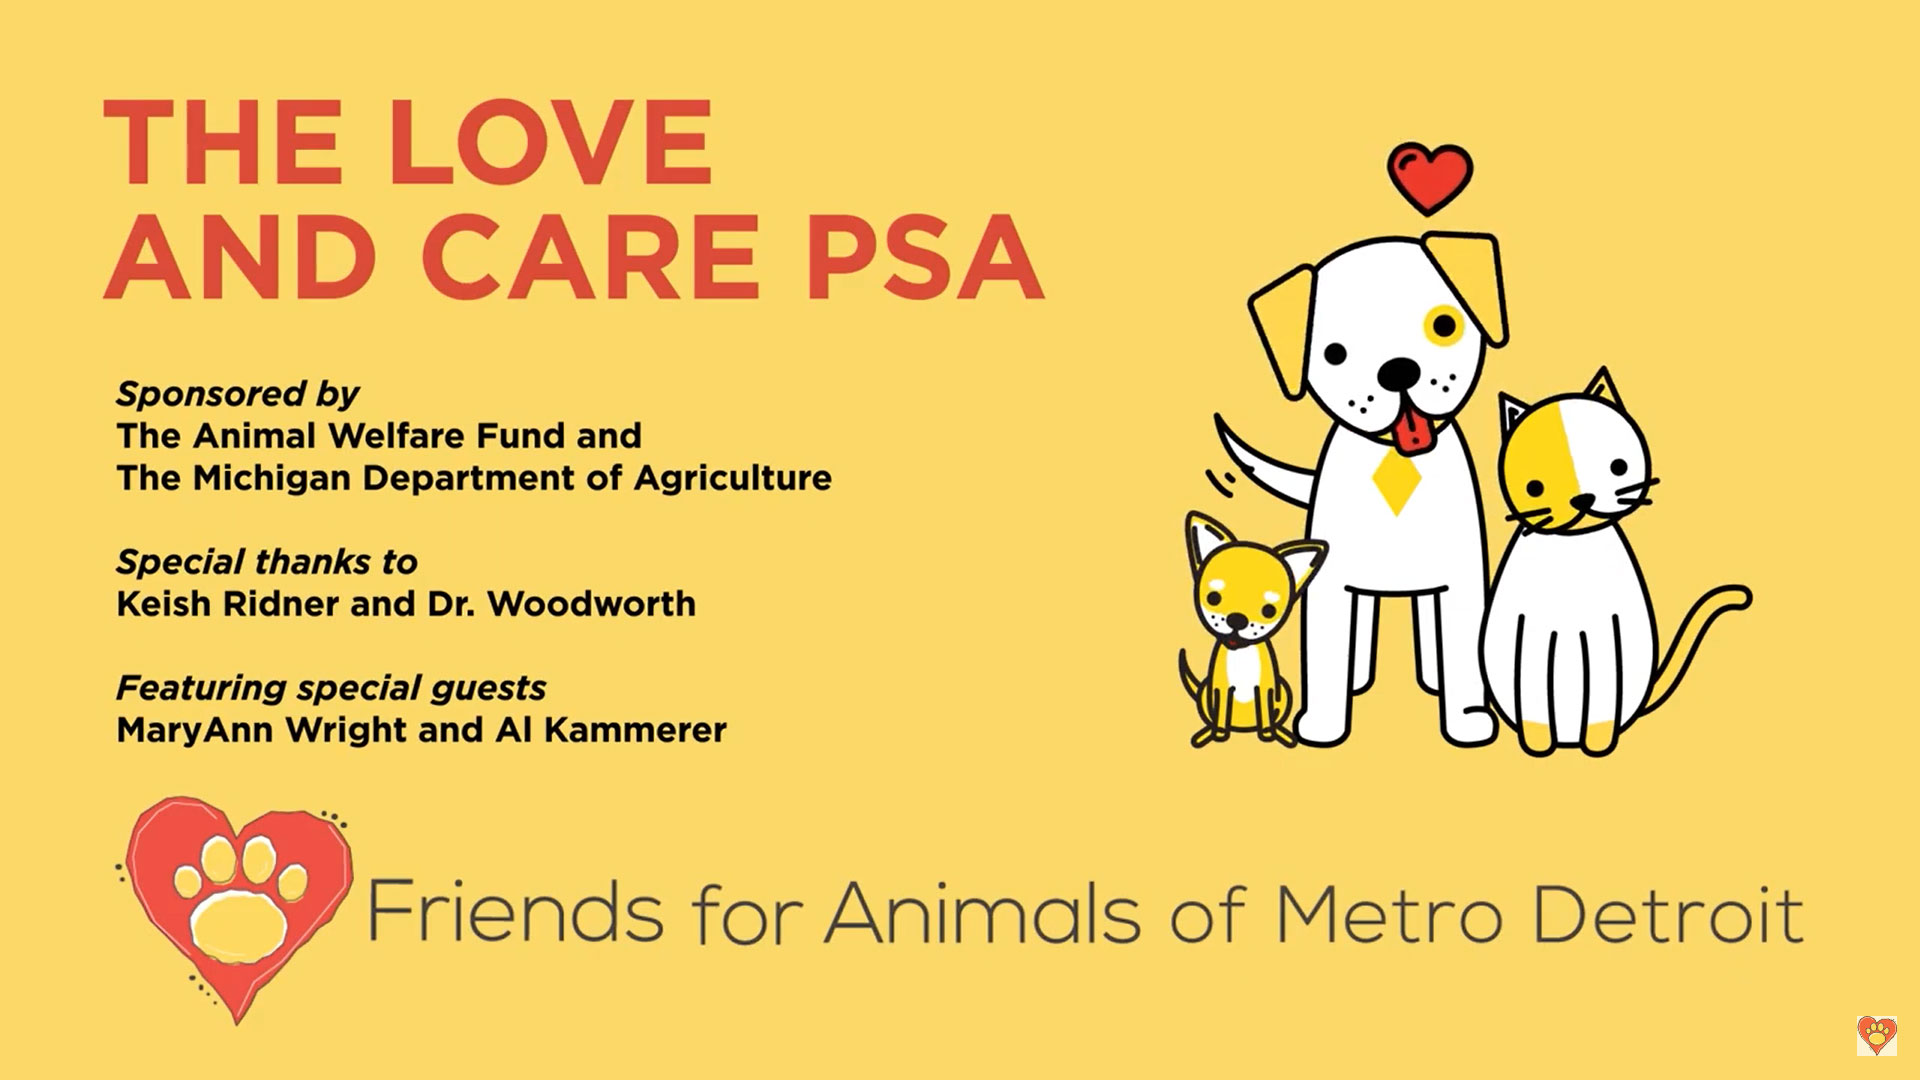 Friends for Animals of Metro Detroit